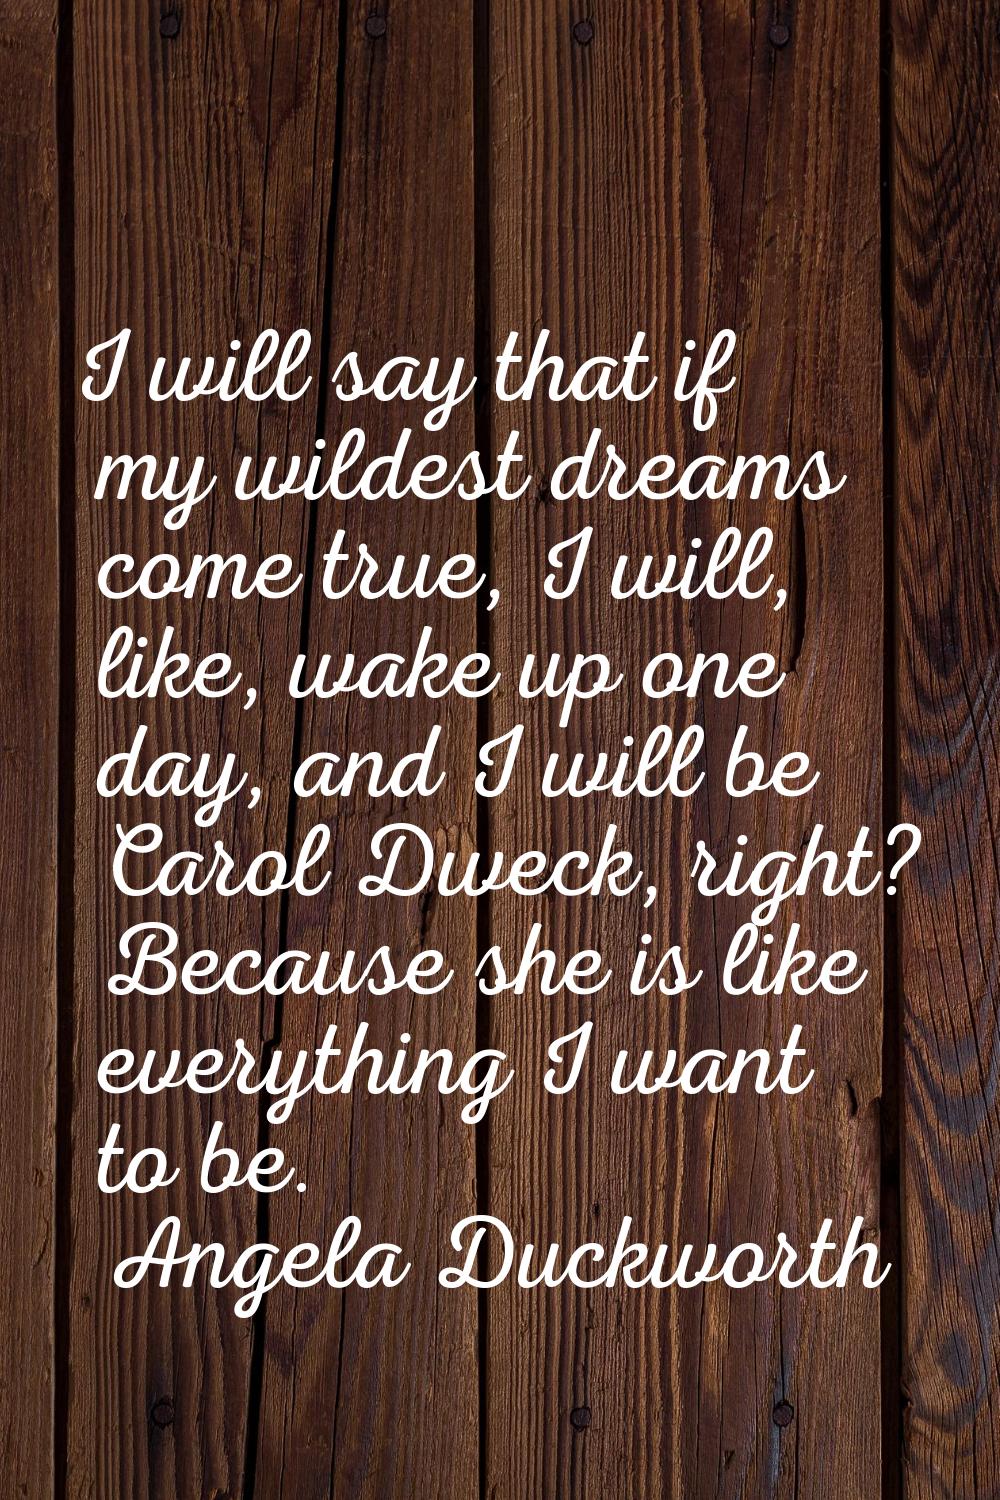 I will say that if my wildest dreams come true, I will, like, wake up one day, and I will be Carol 